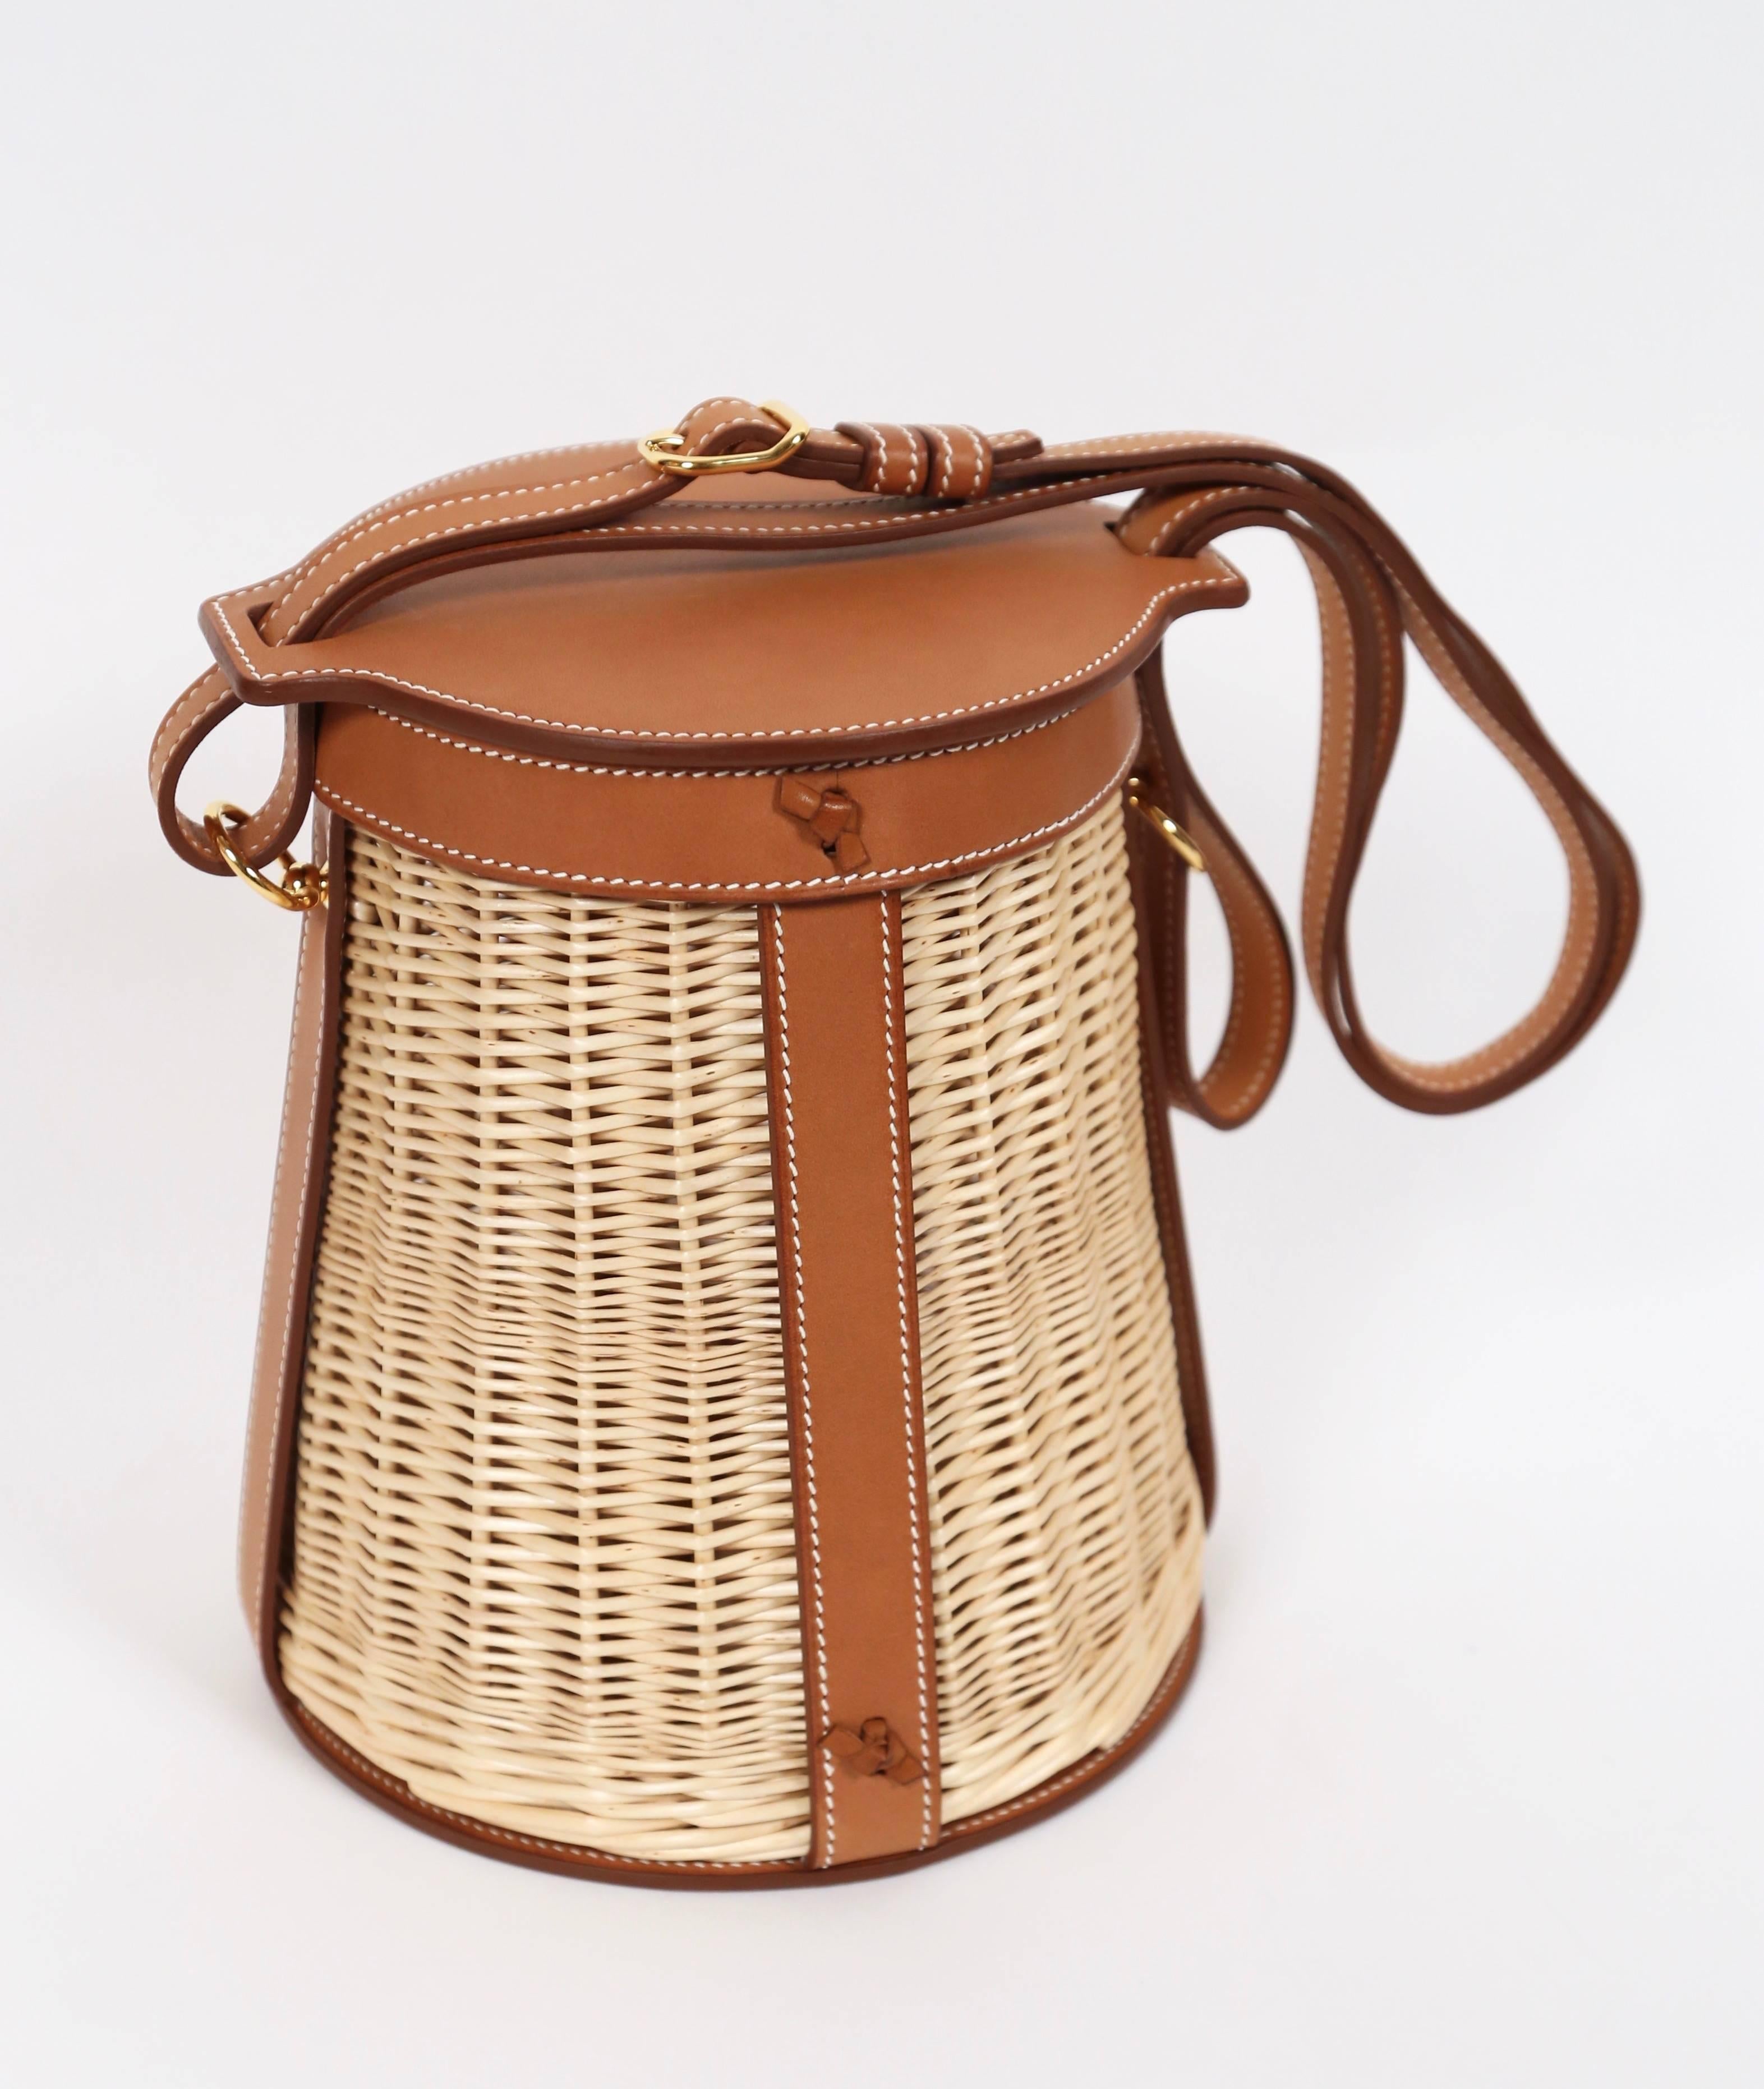 Very rare Hermès Farming Picnic Osier bag in wicker and veau barenia leather designed by Hermes dating to spring/summer of 2015. Limited edition design that is no longer in production. Approximate measurements: height 8”, diameter of base 6.75”,